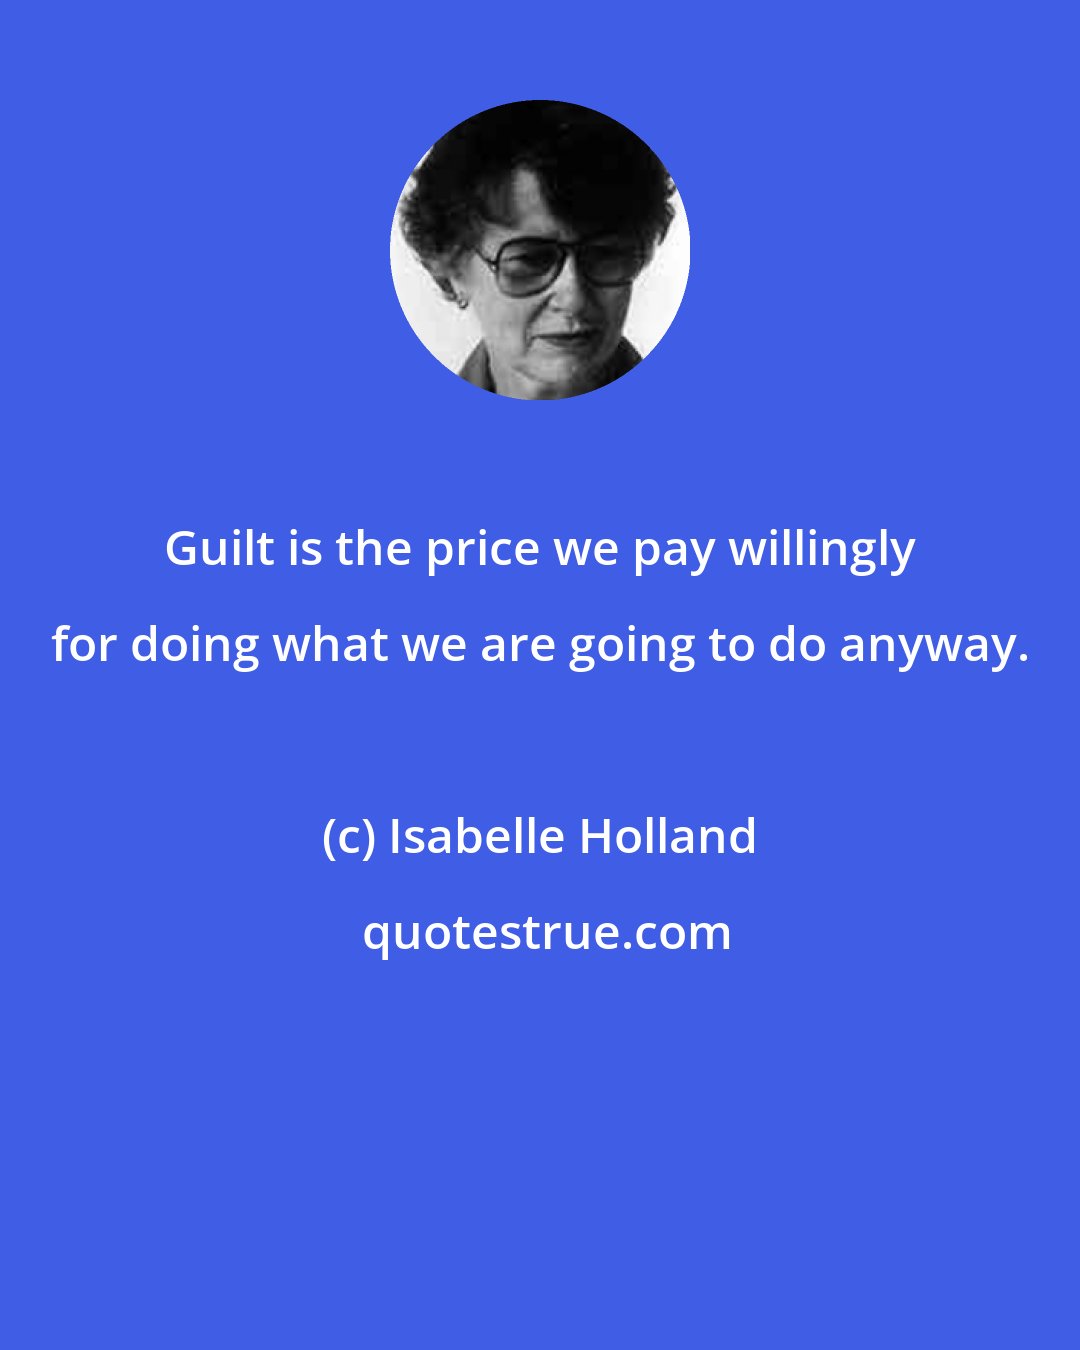 Isabelle Holland: Guilt is the price we pay willingly for doing what we are going to do anyway.